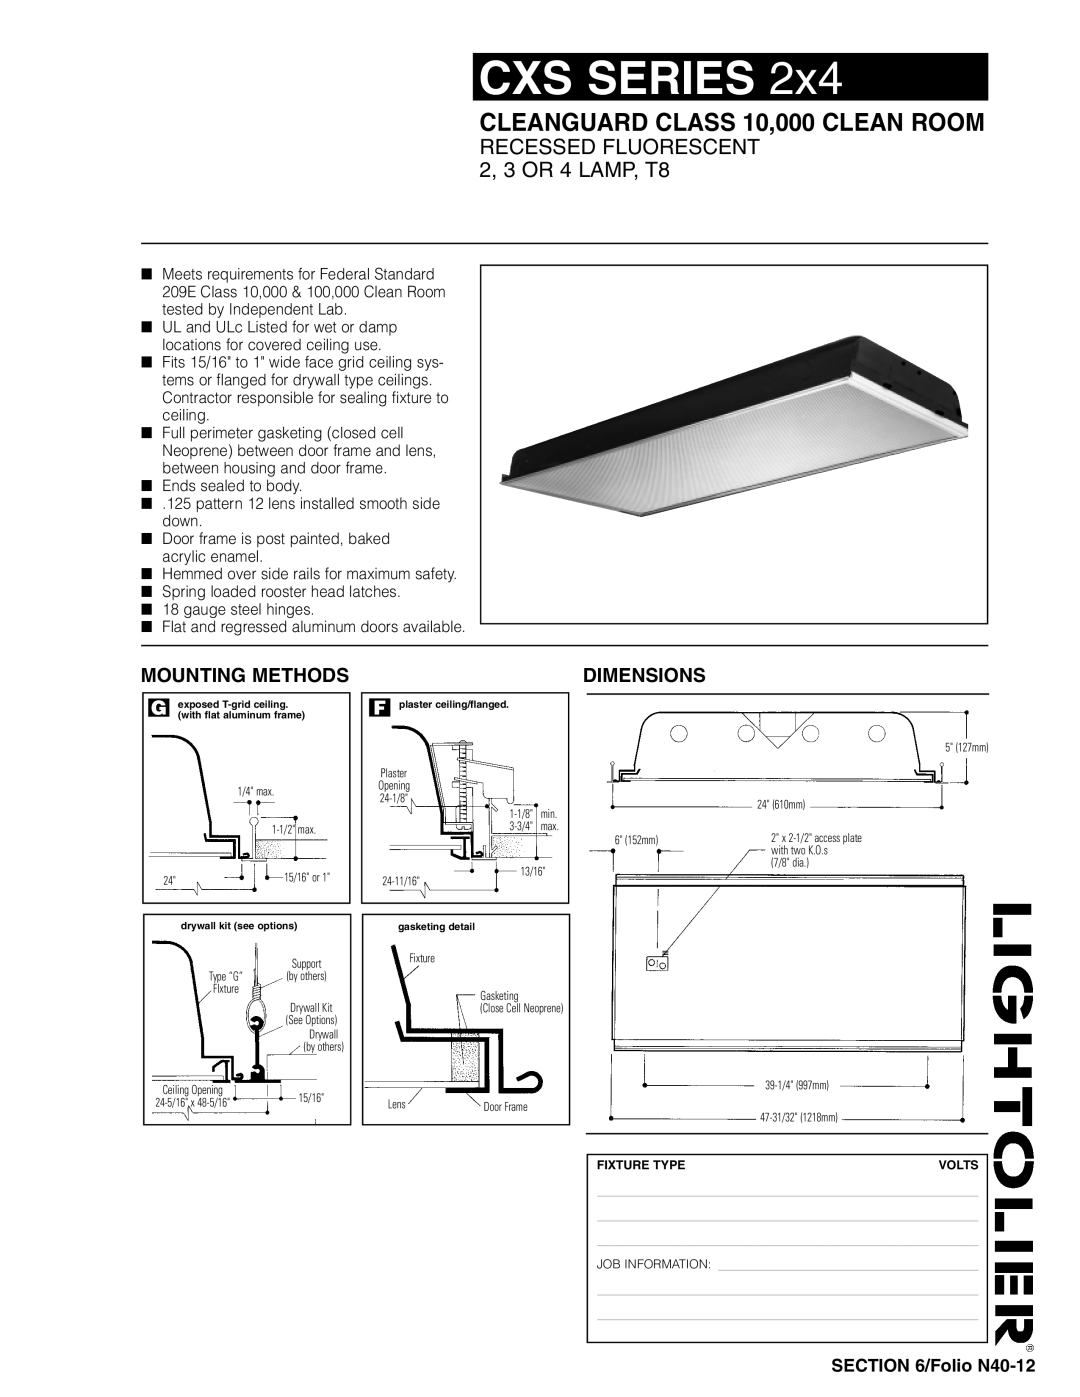 Lightolier CXS Series 2x4 dimensions Cxs Series, RECESSED FLUORESCENT 2, 3 OR 4 LAMP, T8, Mounting Methods, Dimensions 